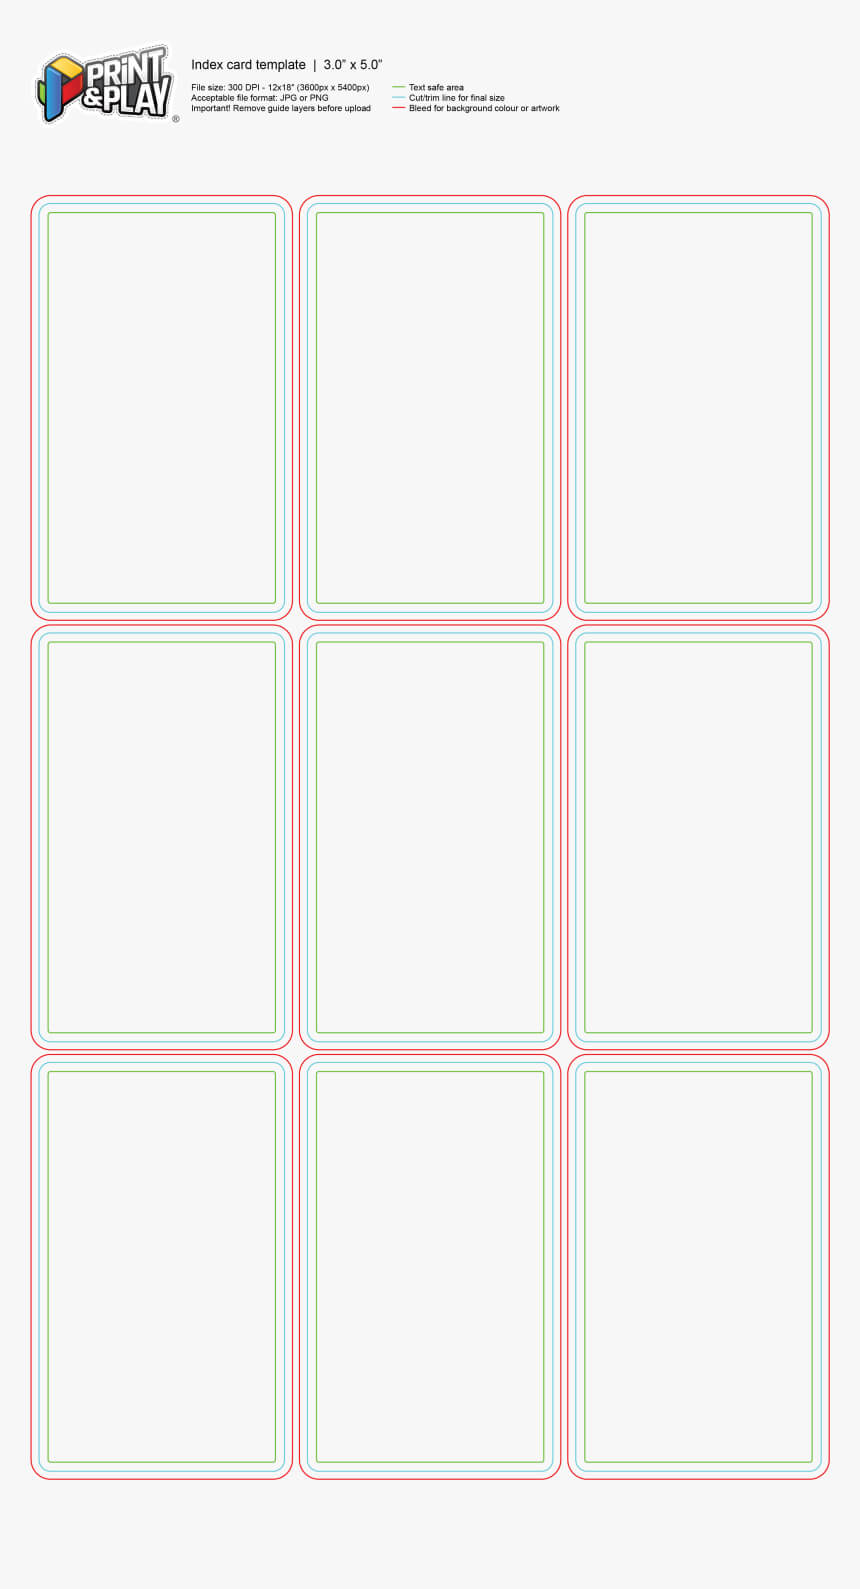 Standard Indecard Index Card Template 3X5 Free Format Google Intended For Blank Index Card Template